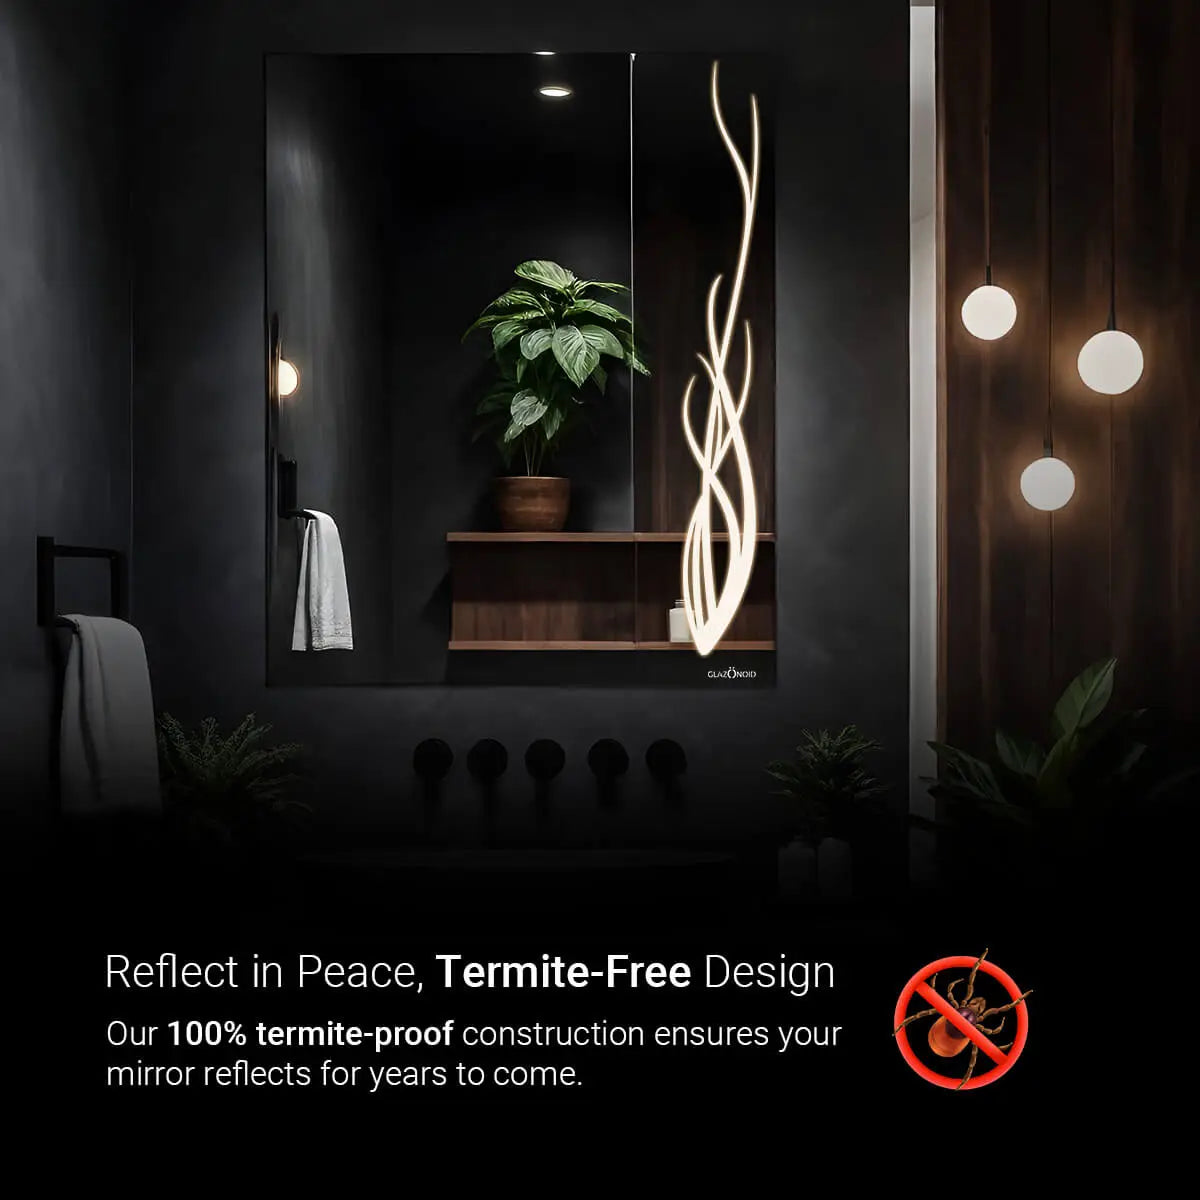 Modern bathroom LED mirror with a reflection of a potted fern on a shelf. The text overlay describes that the mirror is made out of termite proof material and is safe to use.